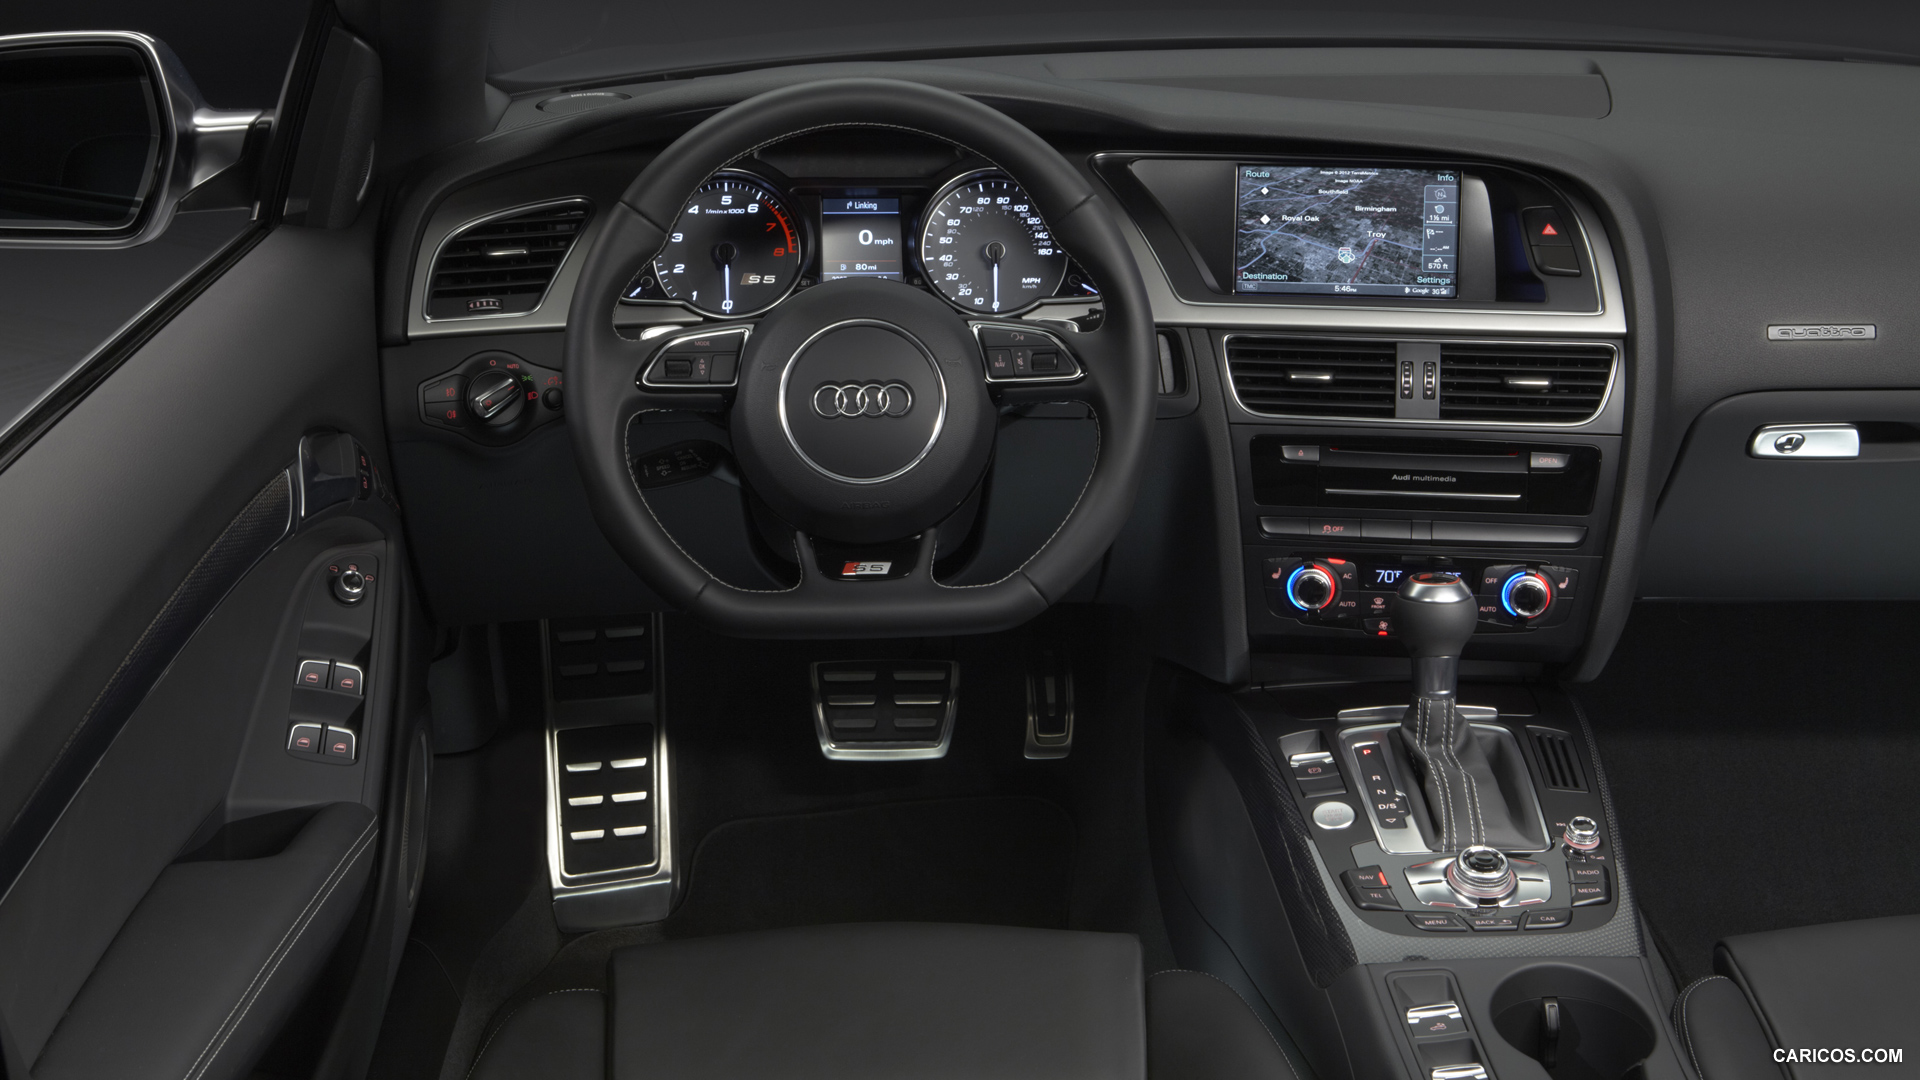 Audi S5 Pictures & Wallpapers: